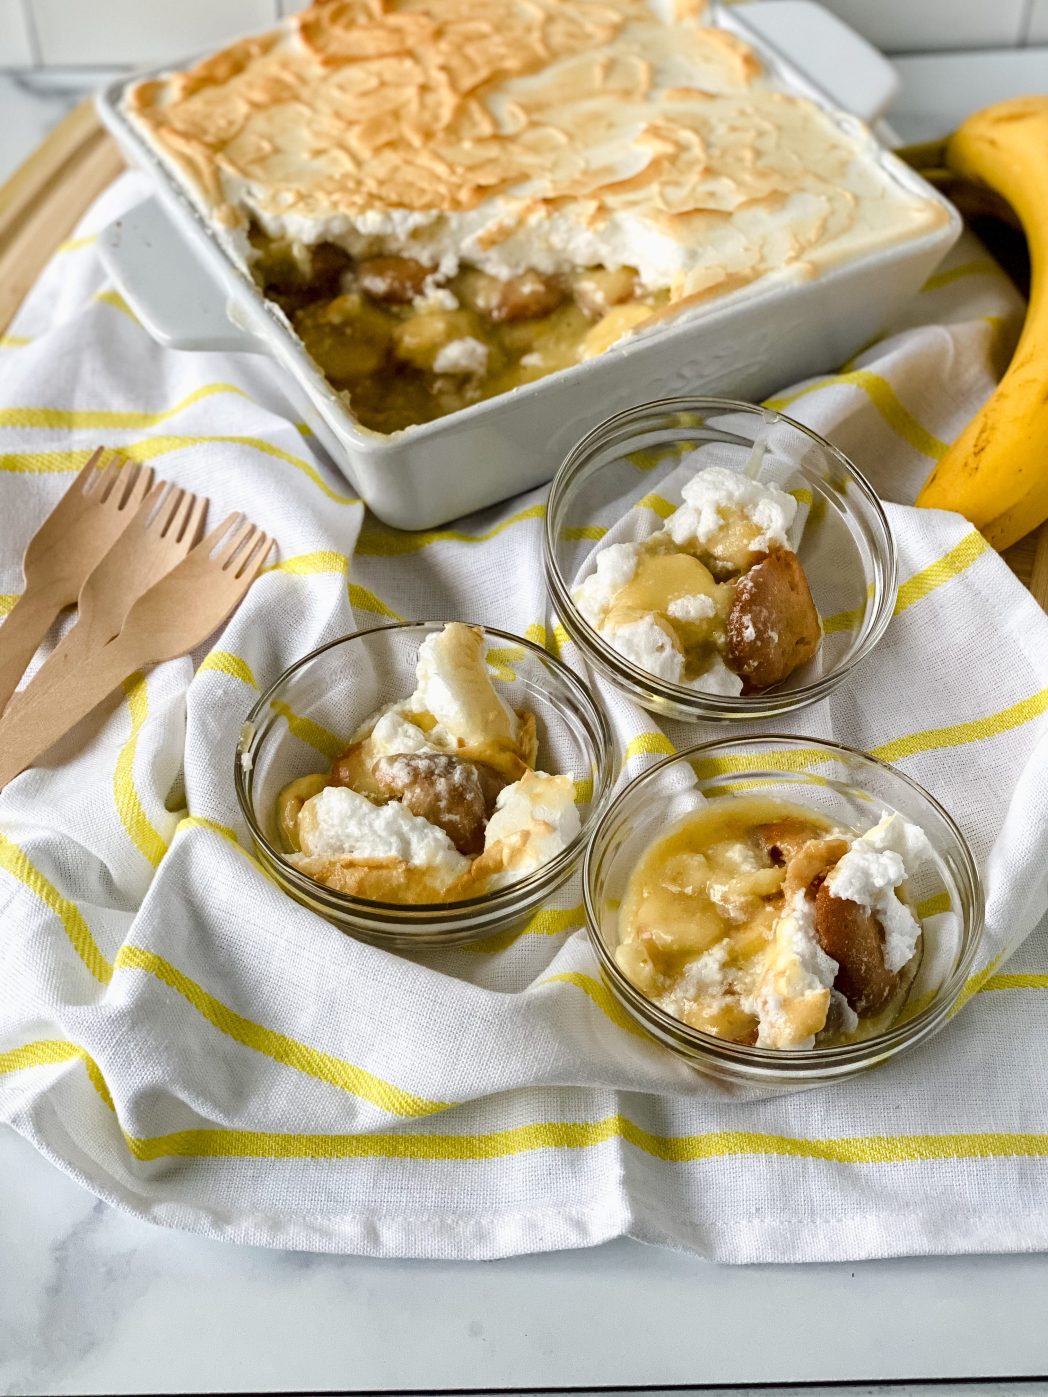 Southern Baked Banana Pudding Delicious and Easy Recipe!